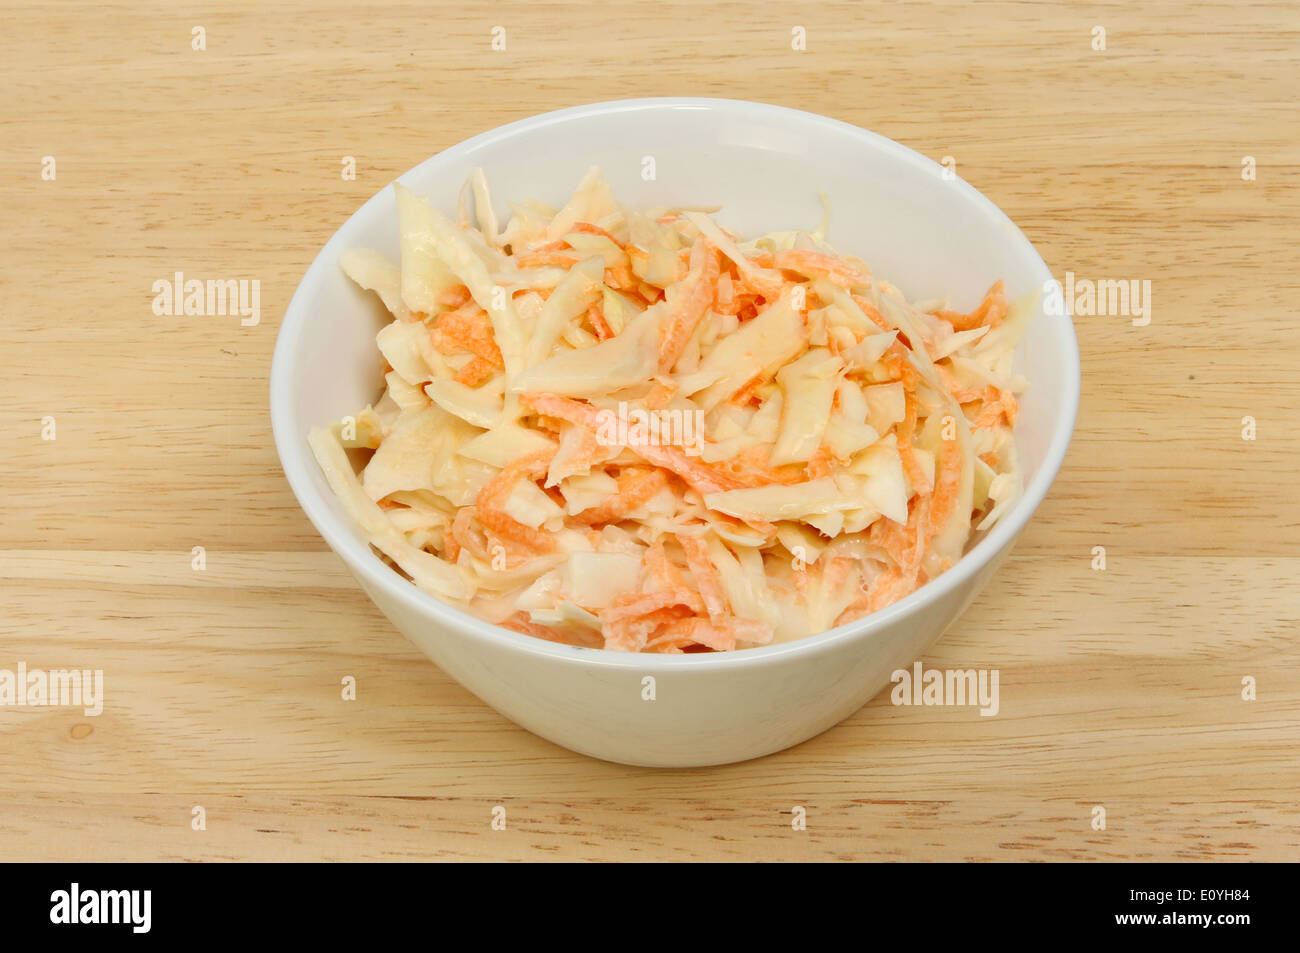 Coleslaw salad in a white bowl on a wooden board Stock Photo